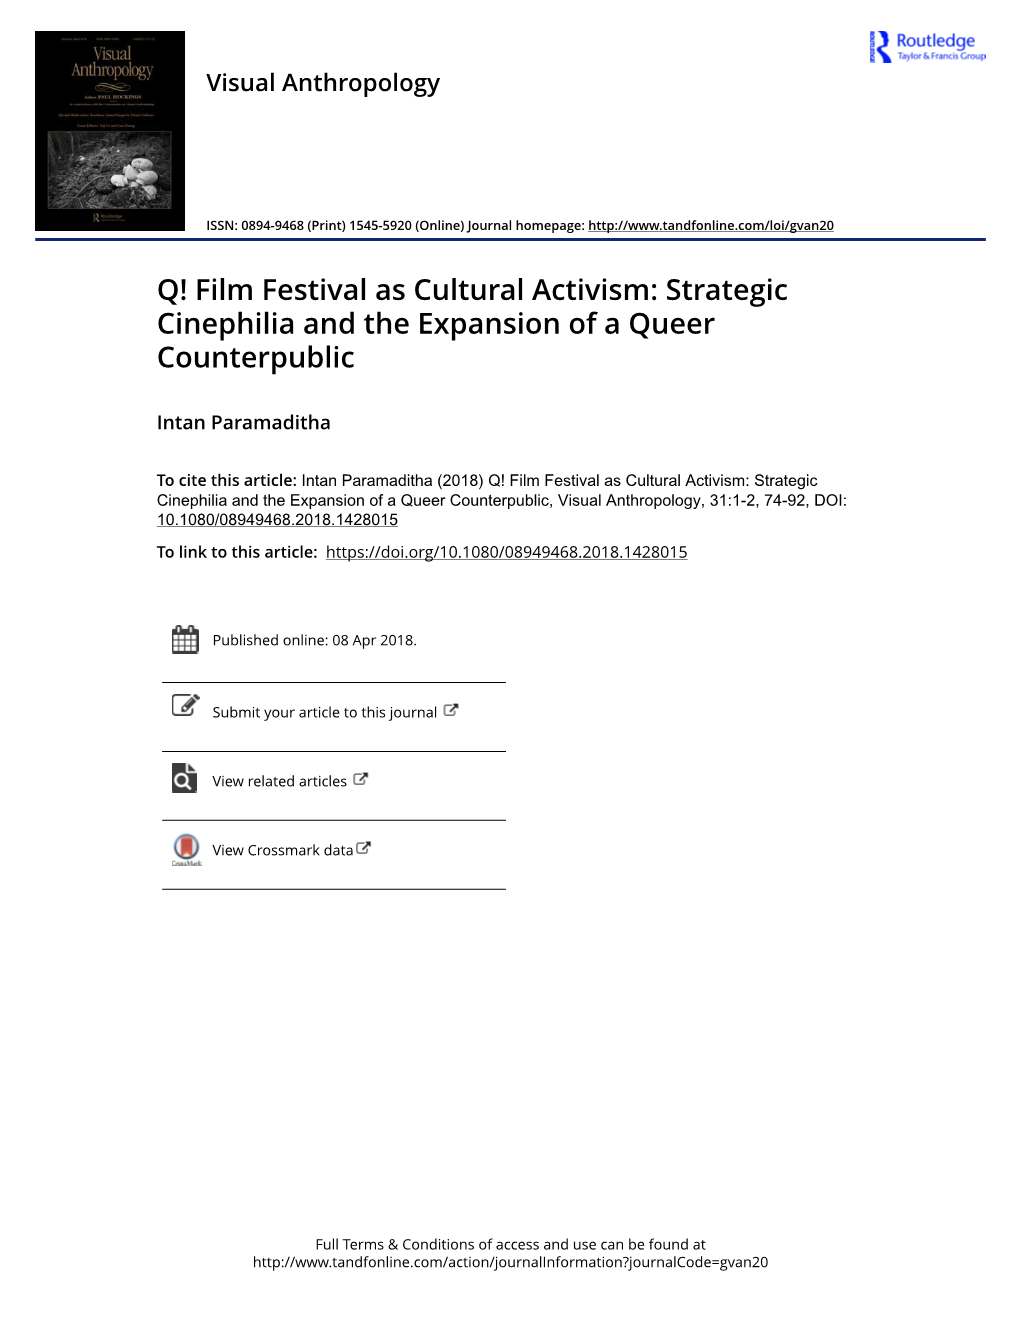 Q! Film Festival As Cultural Activism: Strategic Cinephilia and the Expansion of a Queer Counterpublic